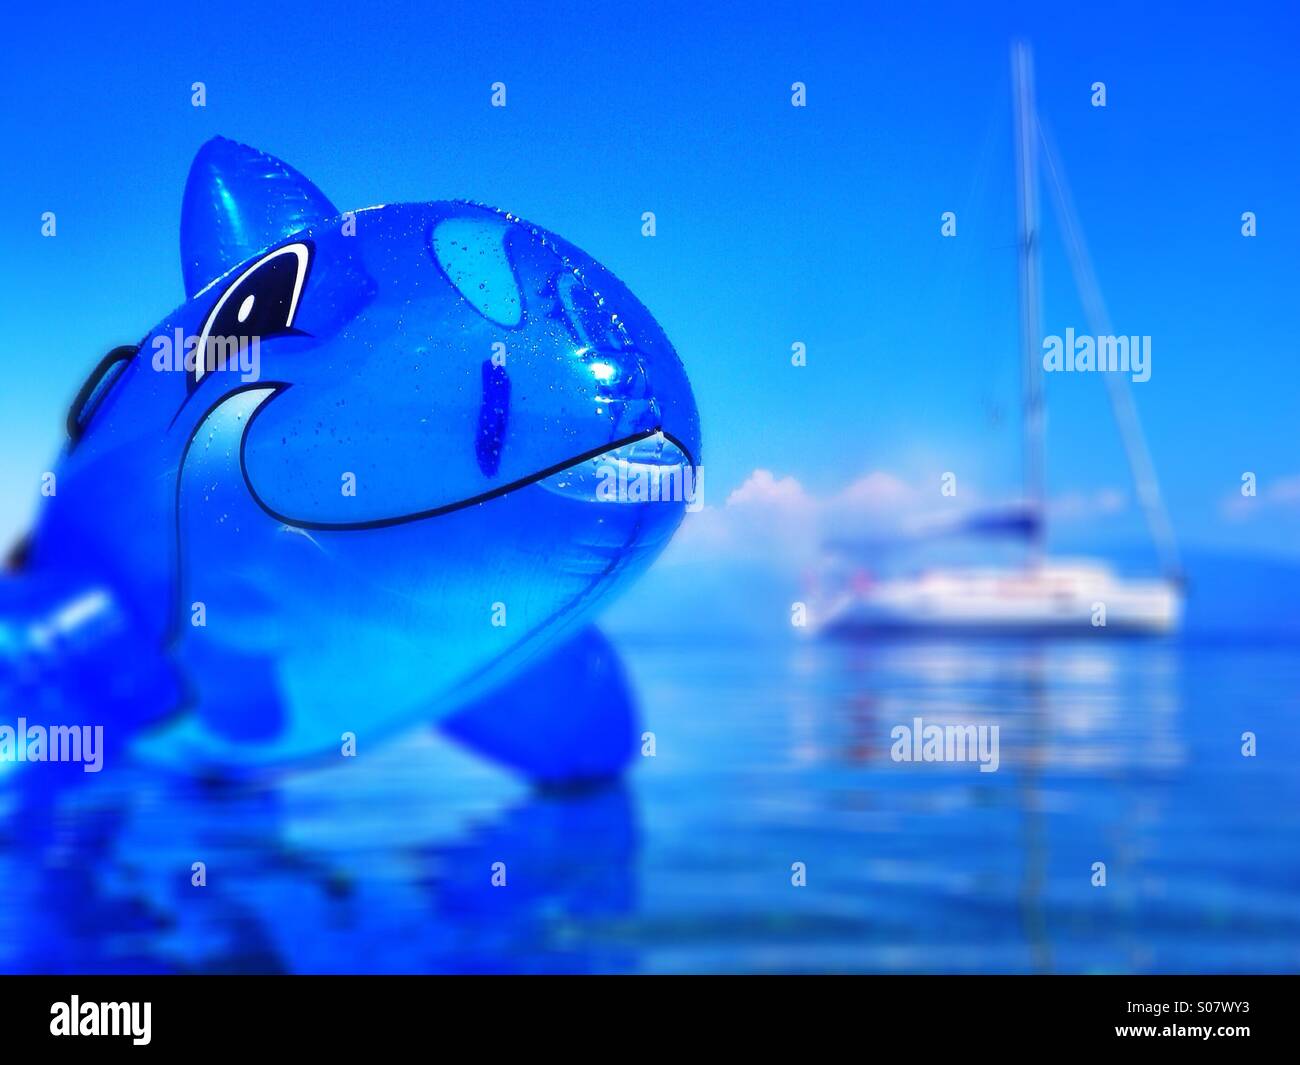 Killer whale attack !                                       Kids inflatable toy with the family's yacht moored behind Stock Photo